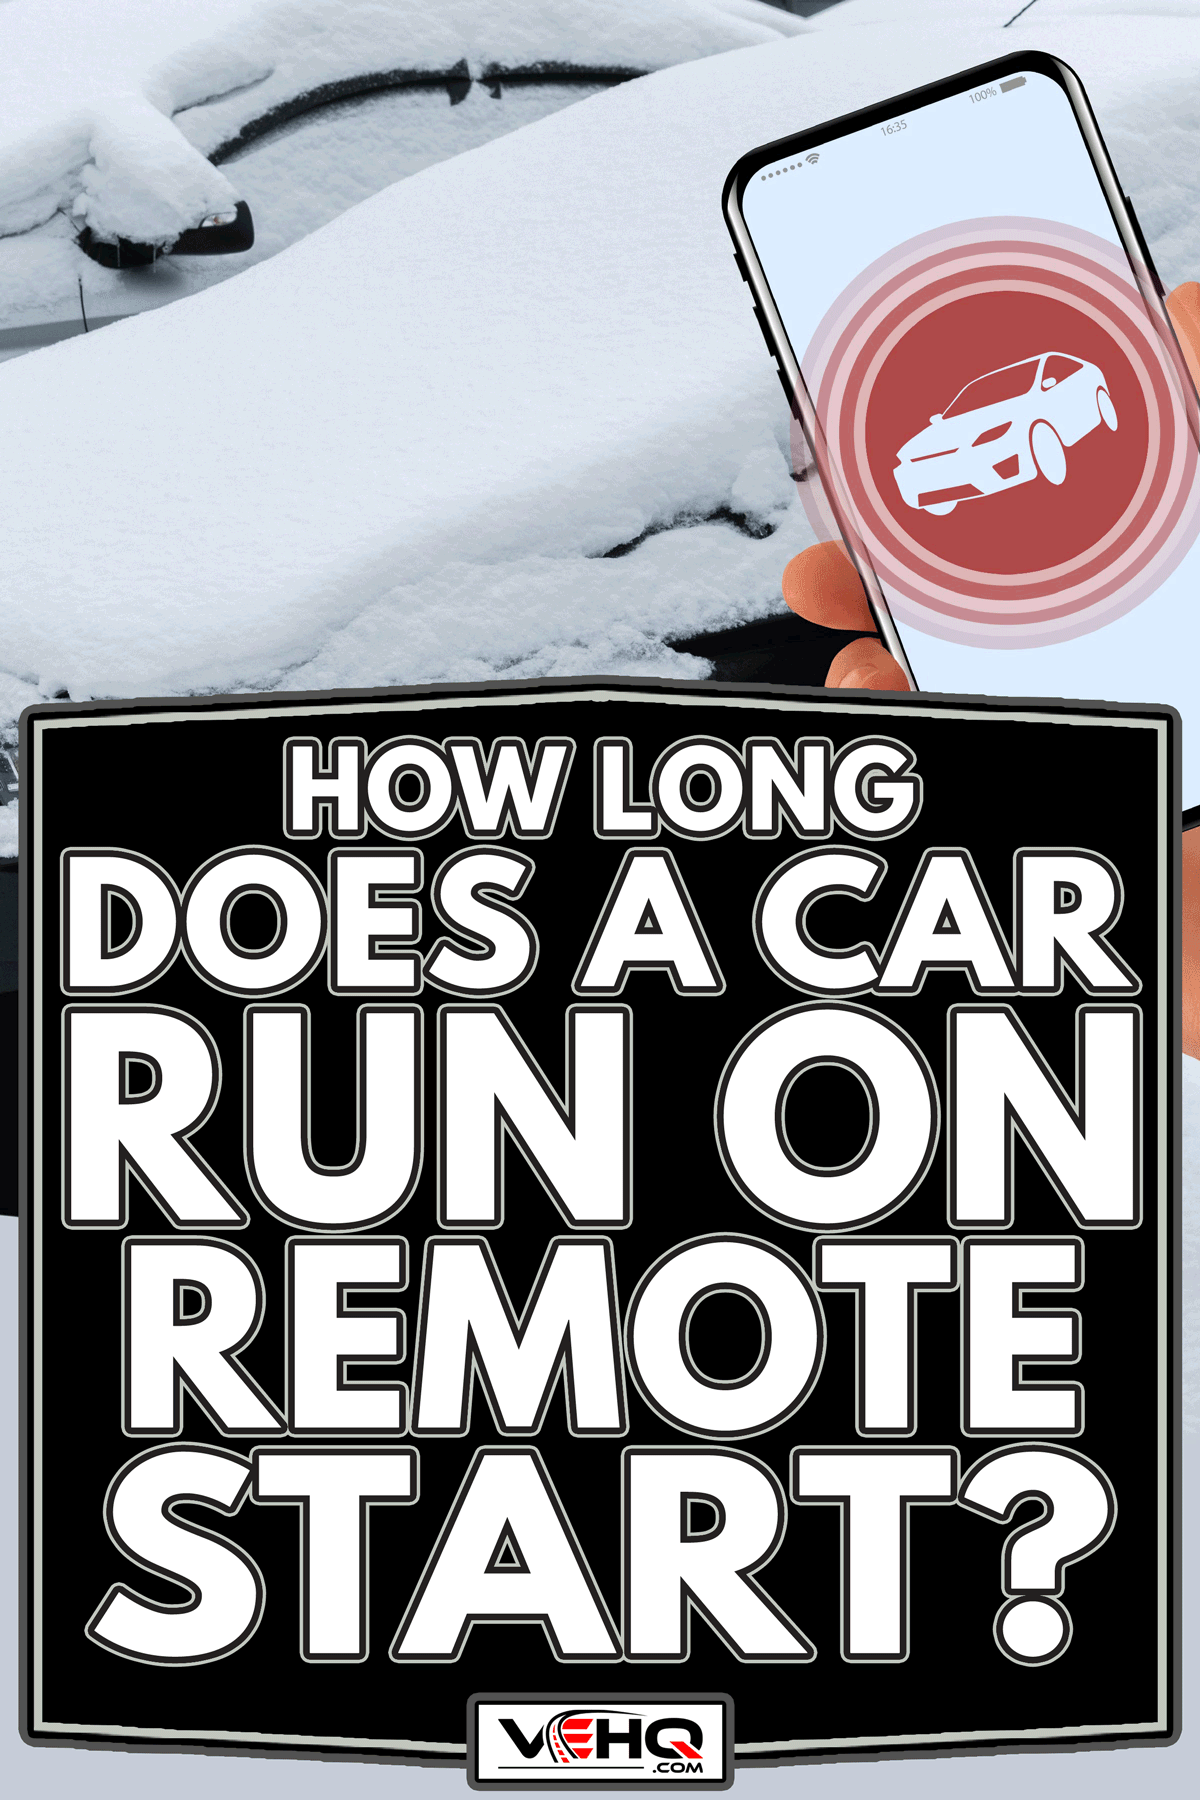 Application for remote engine start and car warm-up, How Long Does A Car Run On Remote Start?